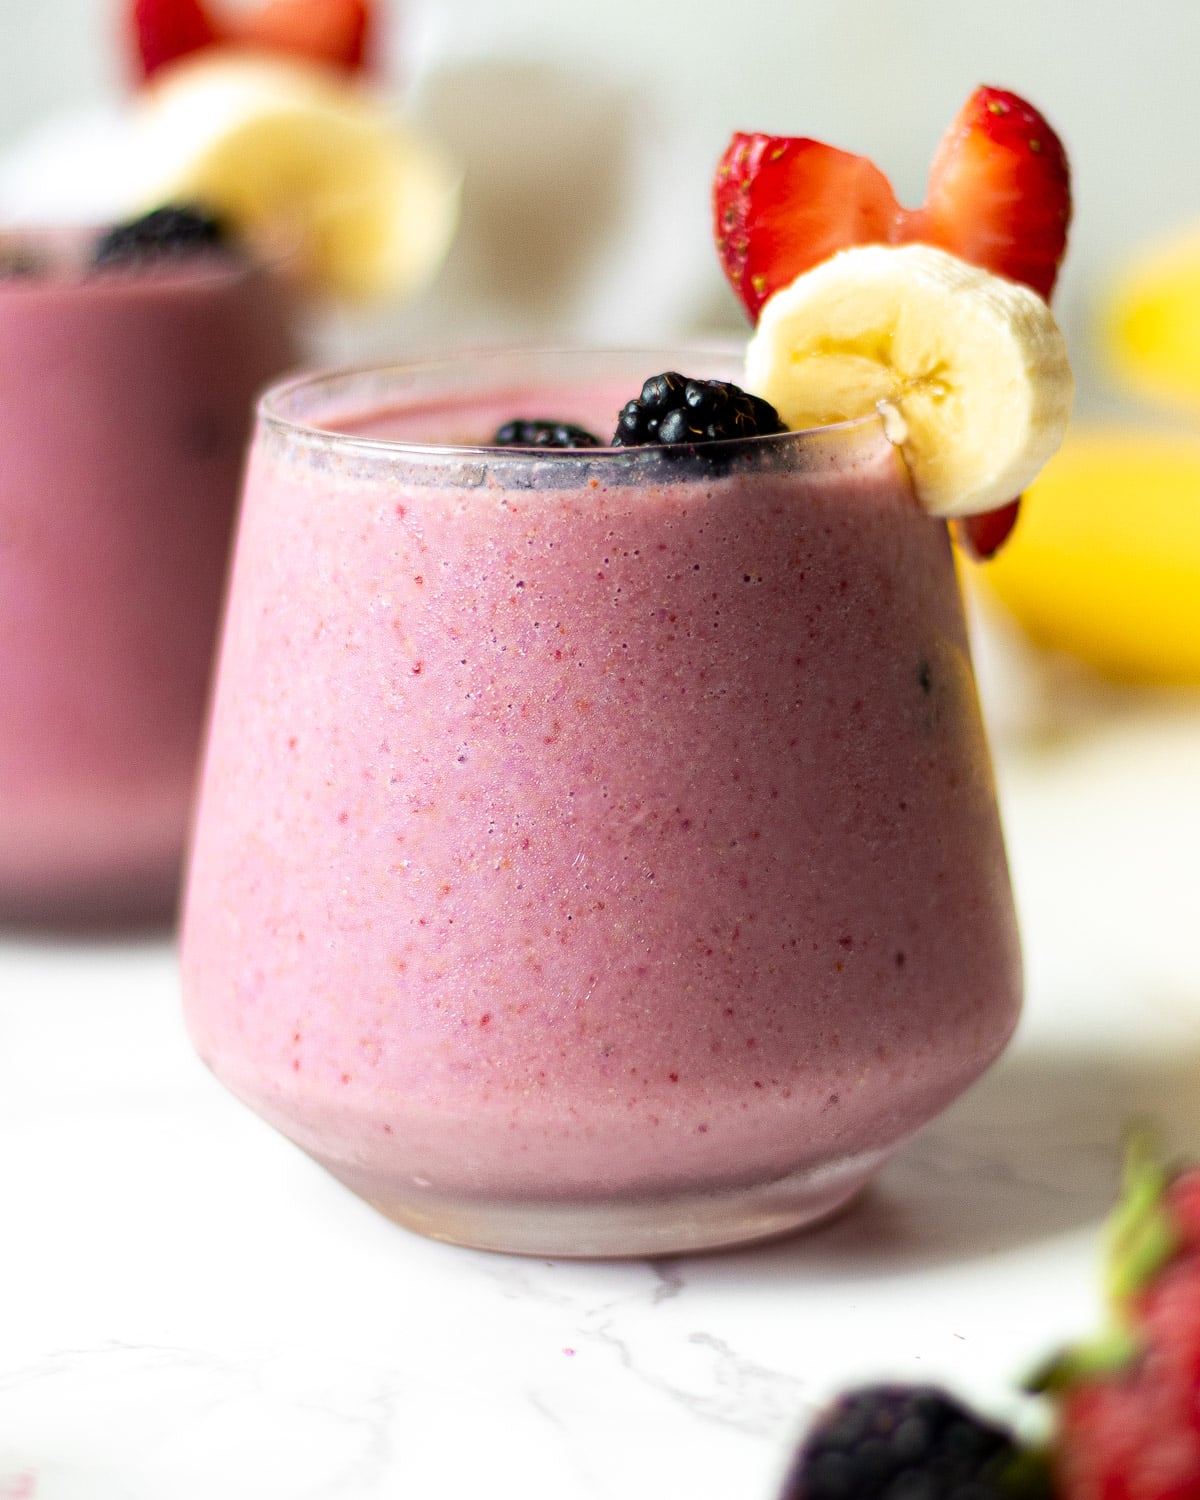 blackberry strawberry banana smoothie in glasses with fruit garnish